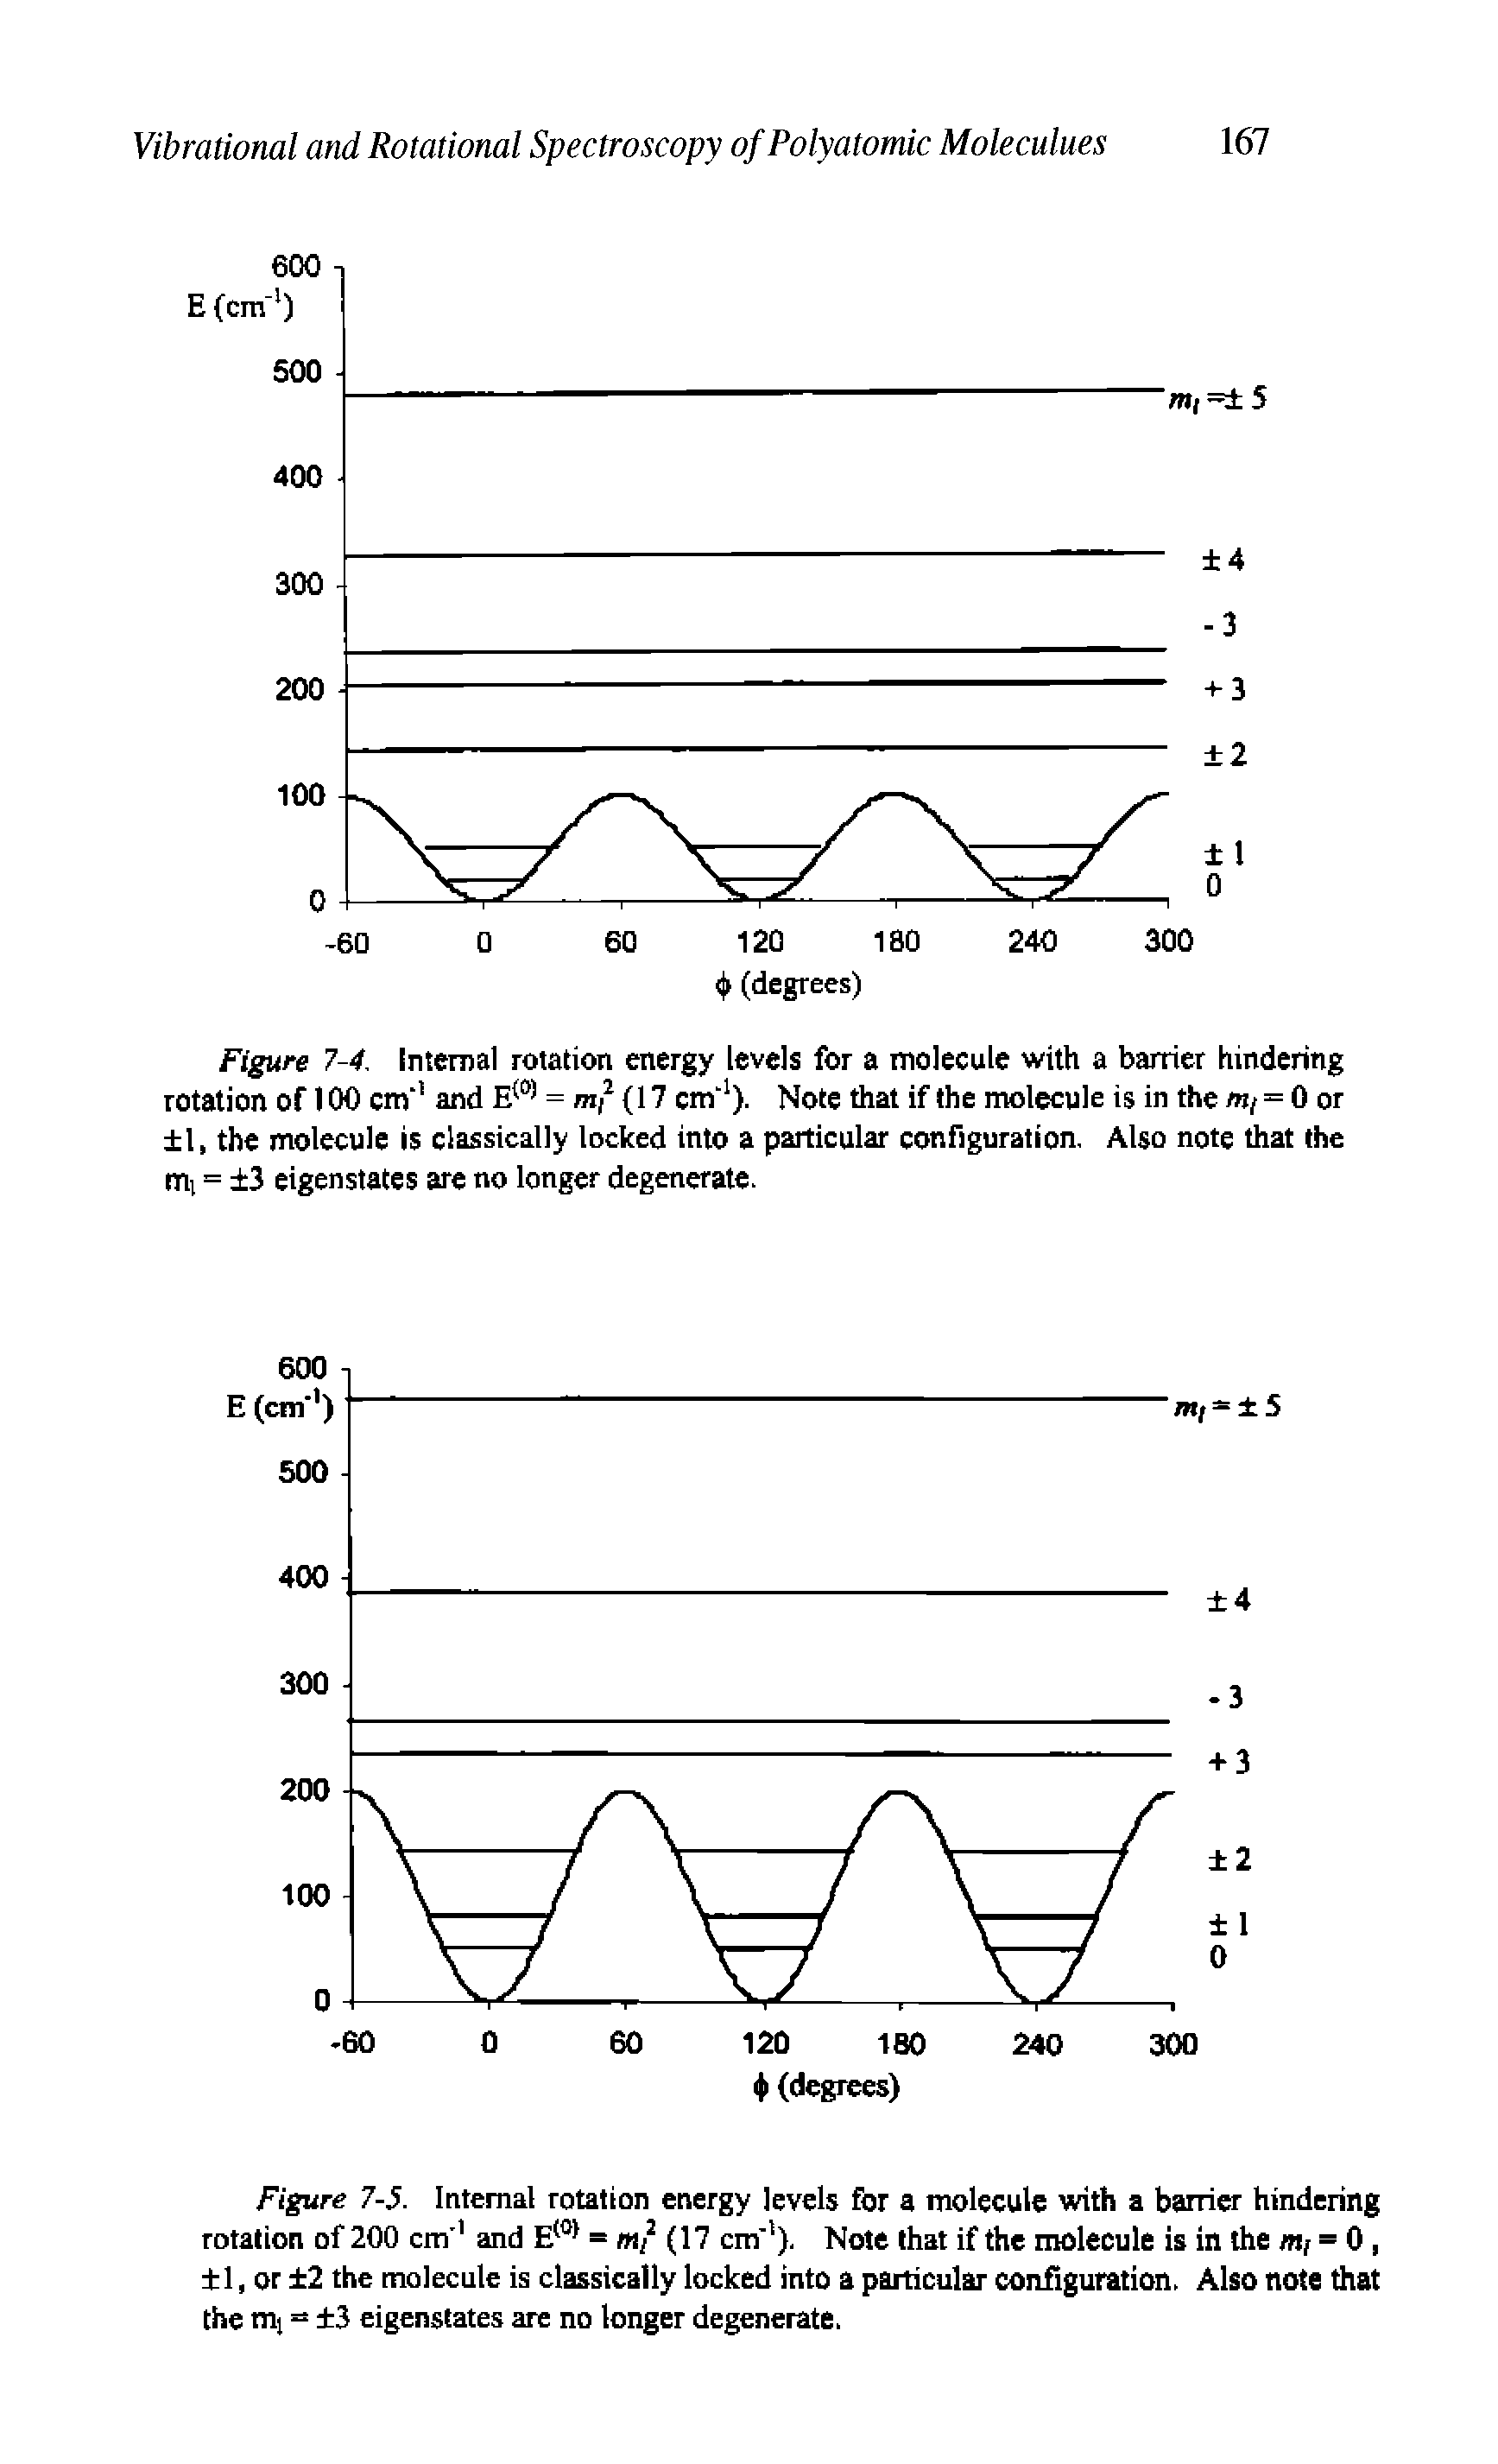 Figure 7-4. Internal rotation energy levels for a molecule with a barrier hindering rotation of 100 cm" and 17 cm" ). Note that if the molecule is in the / = 0 or...